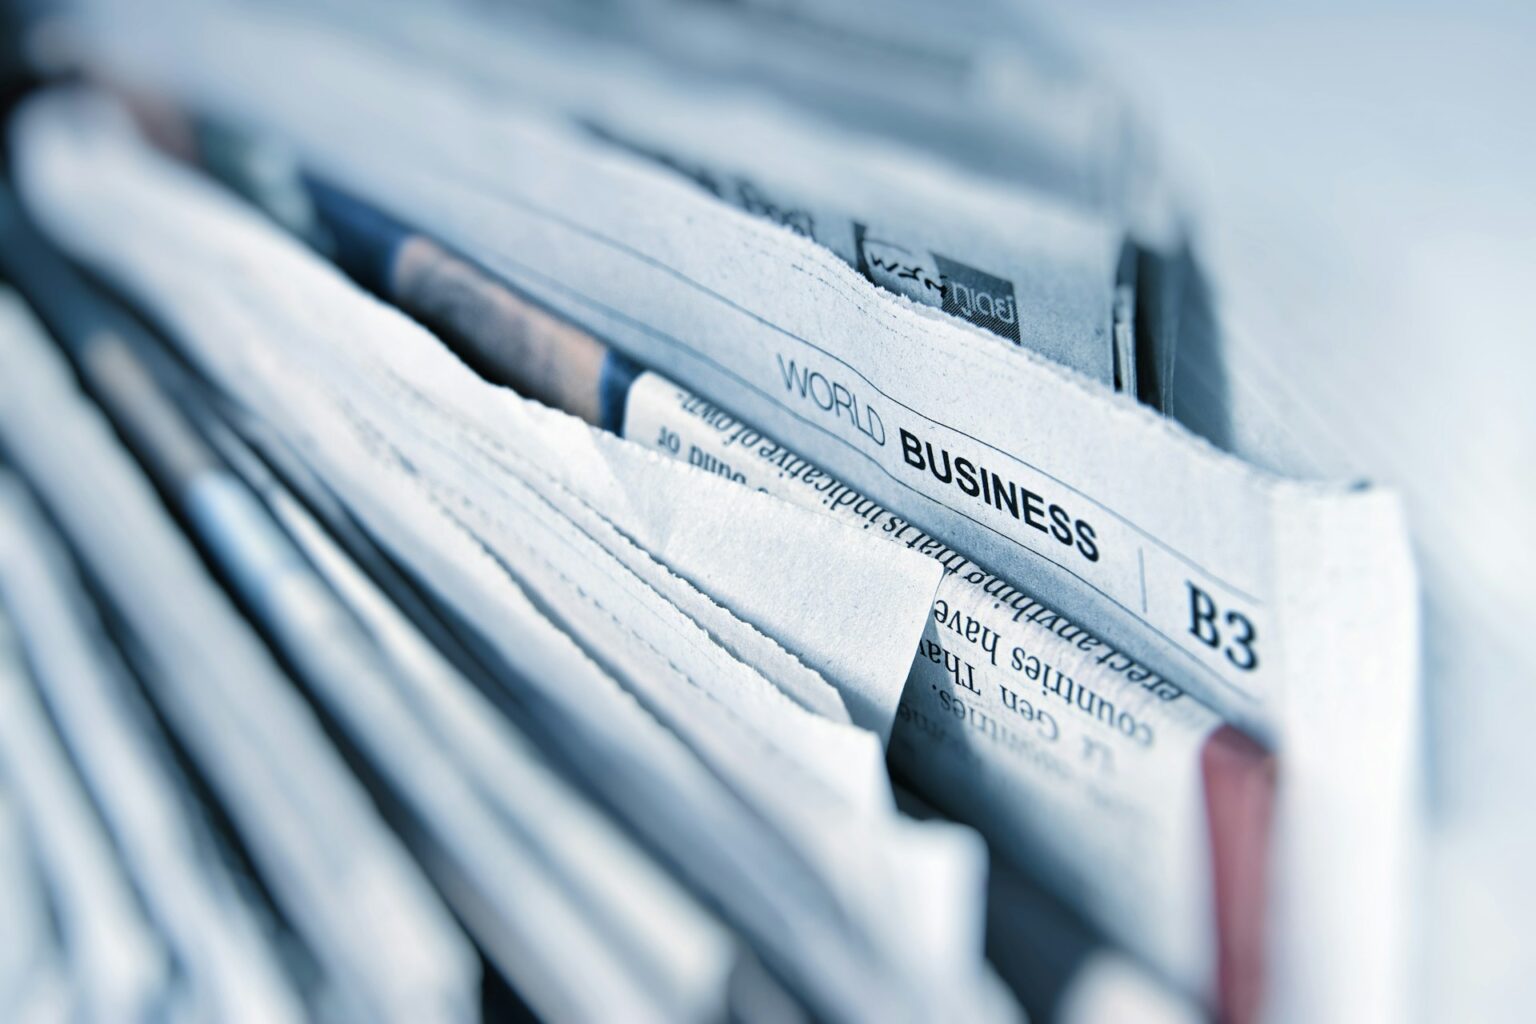 Image of the "business" section of a newspaper.